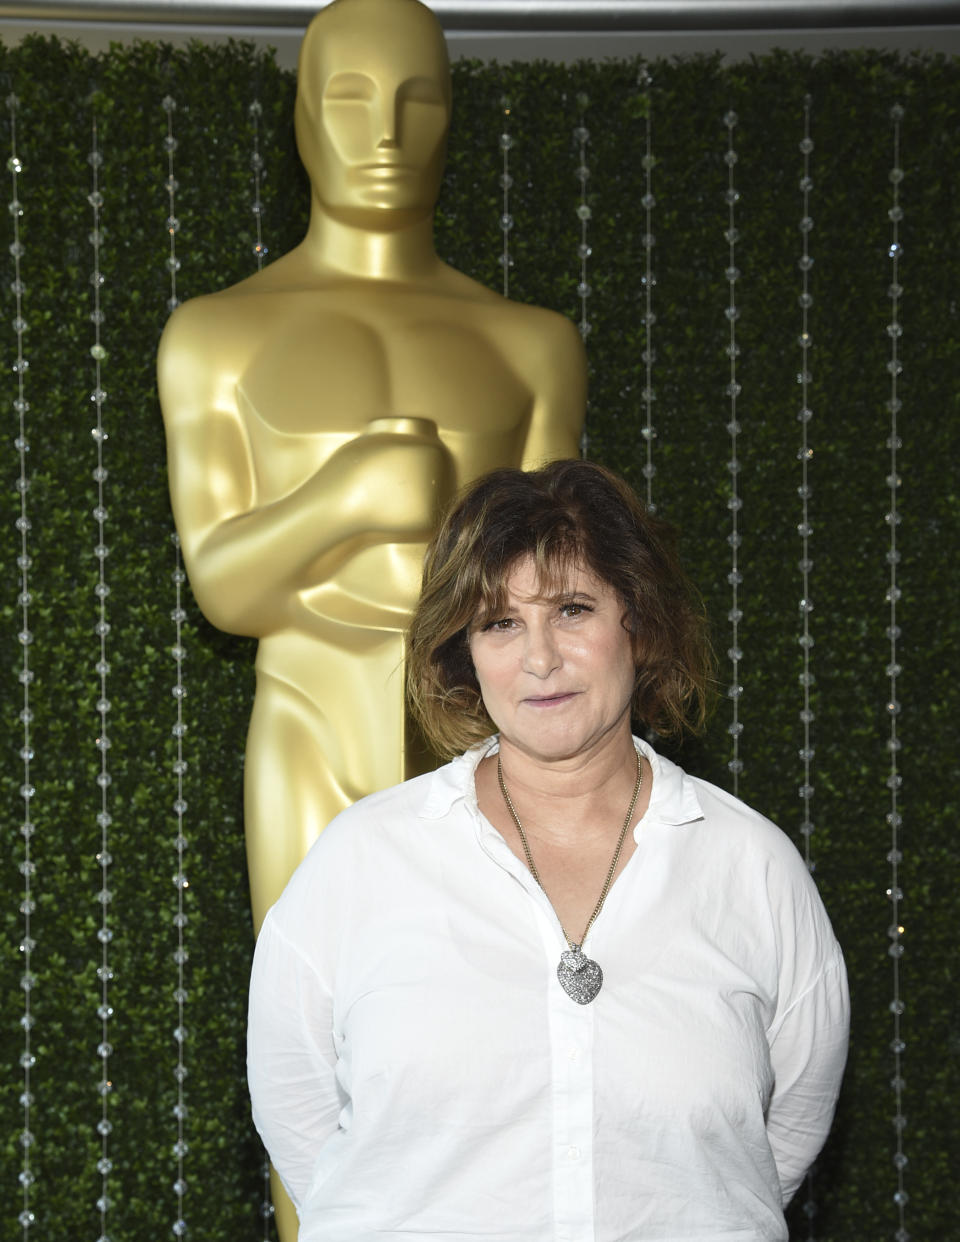 Film producer Amy Pascal attends the Academy of Motion Picture Arts and Sciences Women's Initiative New York luncheon at the Rainbow Room on Wednesday, Oct. 2, 2019, in New York. (Photo by Evan Agostini/Invision/AP)